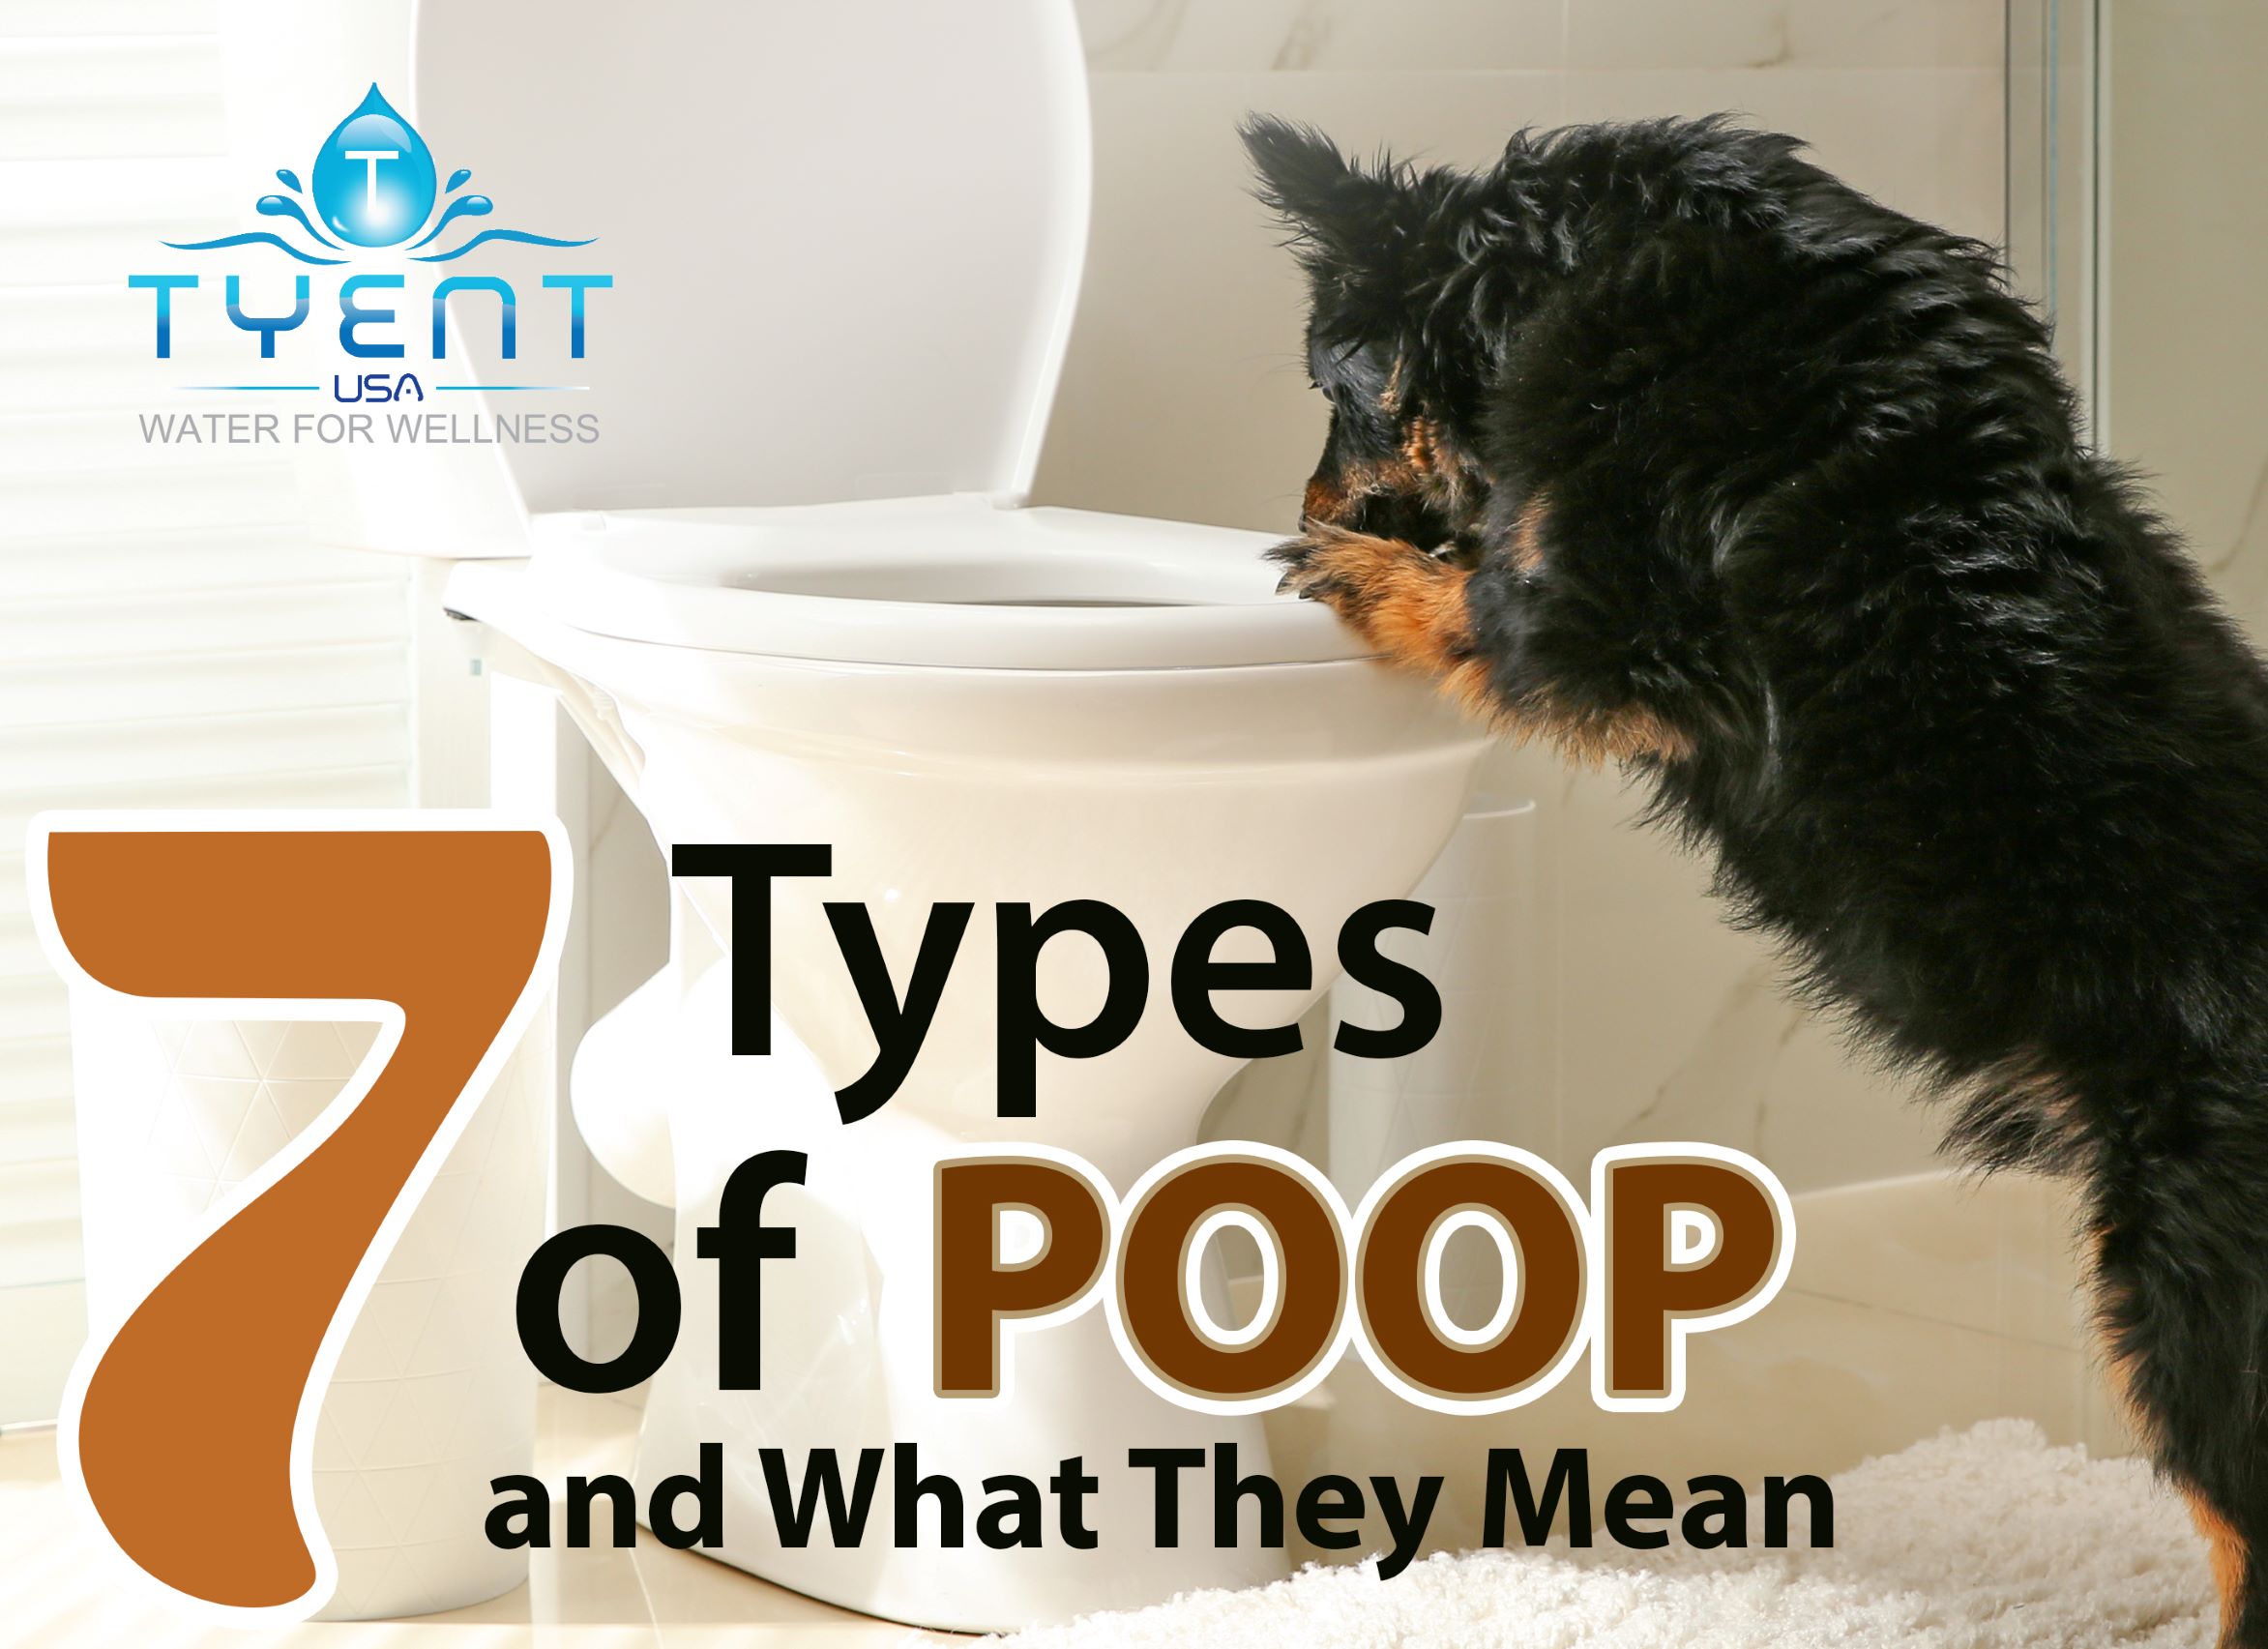 What Are the 7 Types of Poop?